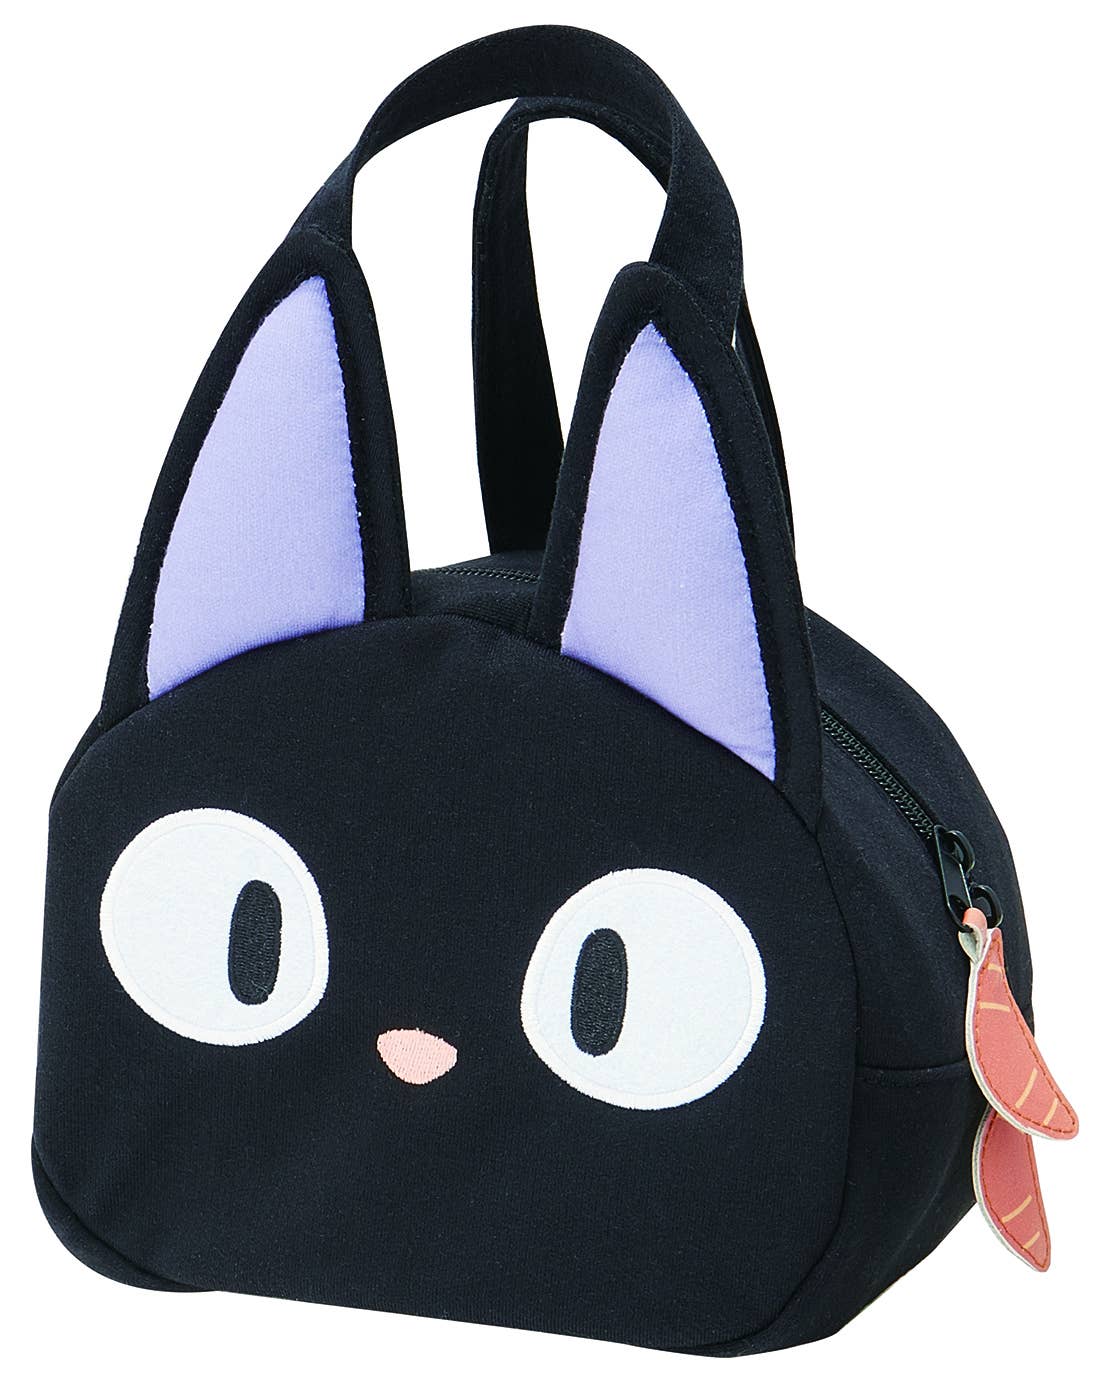 Clever Idiots Kiki's Delivery Service Die Cut Lunch Bag - Jiji Kawaii Gifts 4973307445842